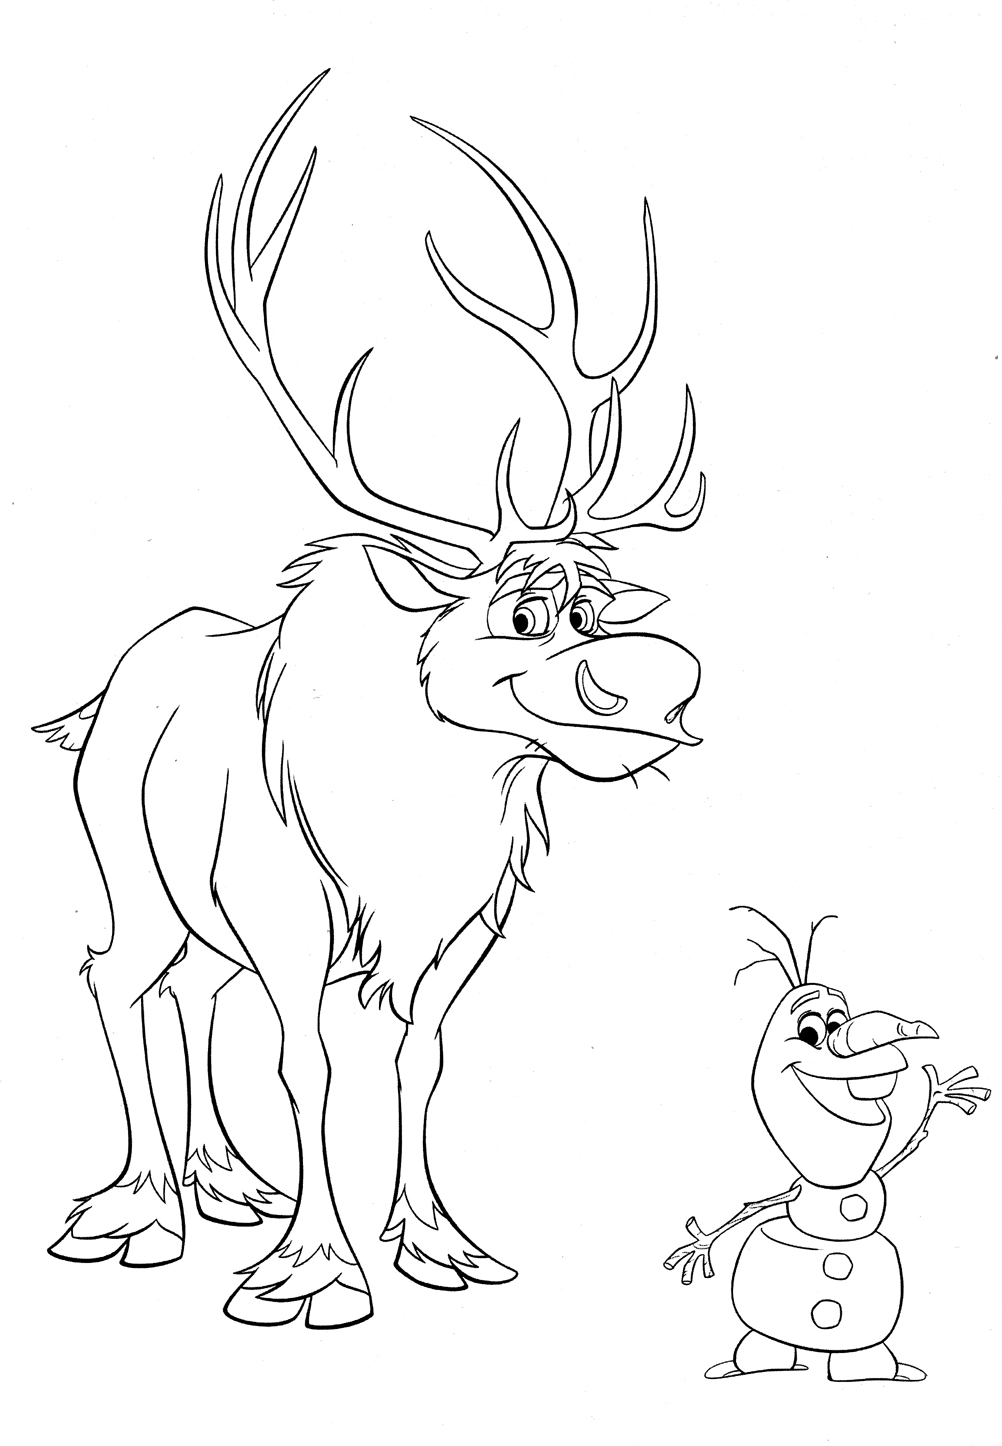 Coloring Pages : Olaf Coloring Pages With Sven Amazing Free ...